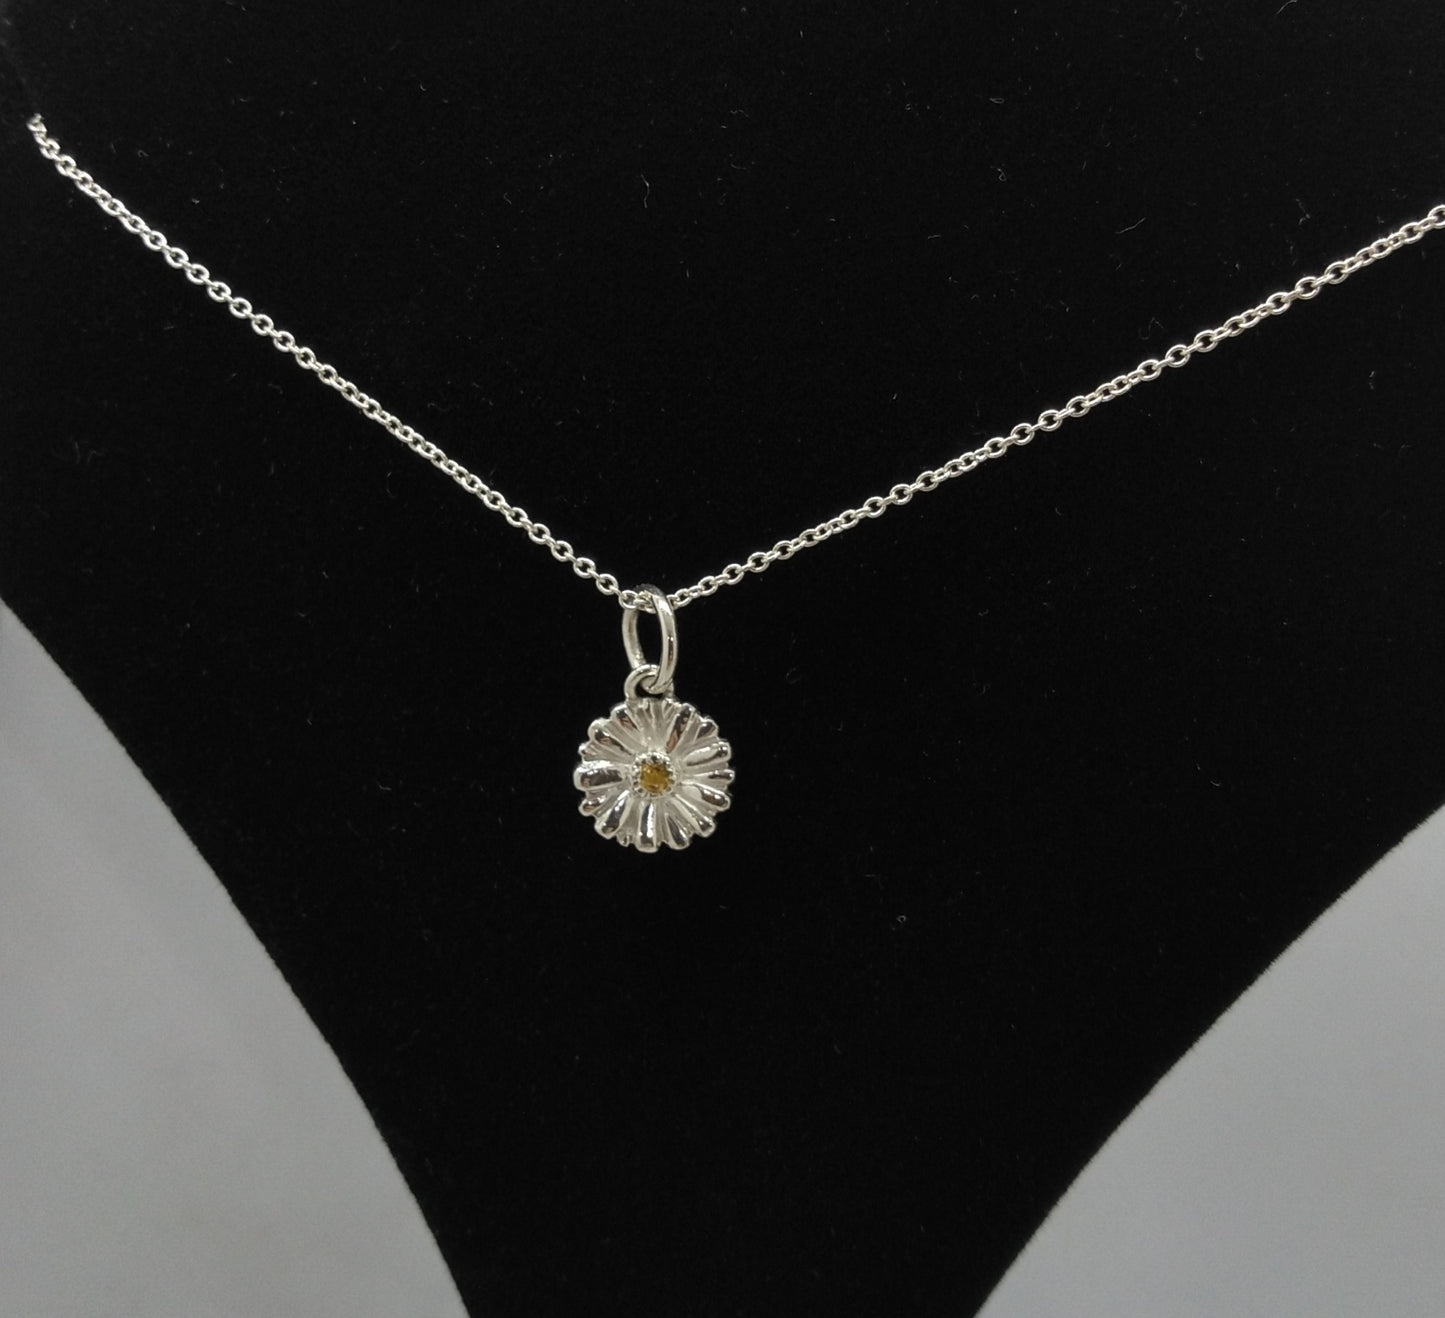 Dainty Daisy Necklace in Silver